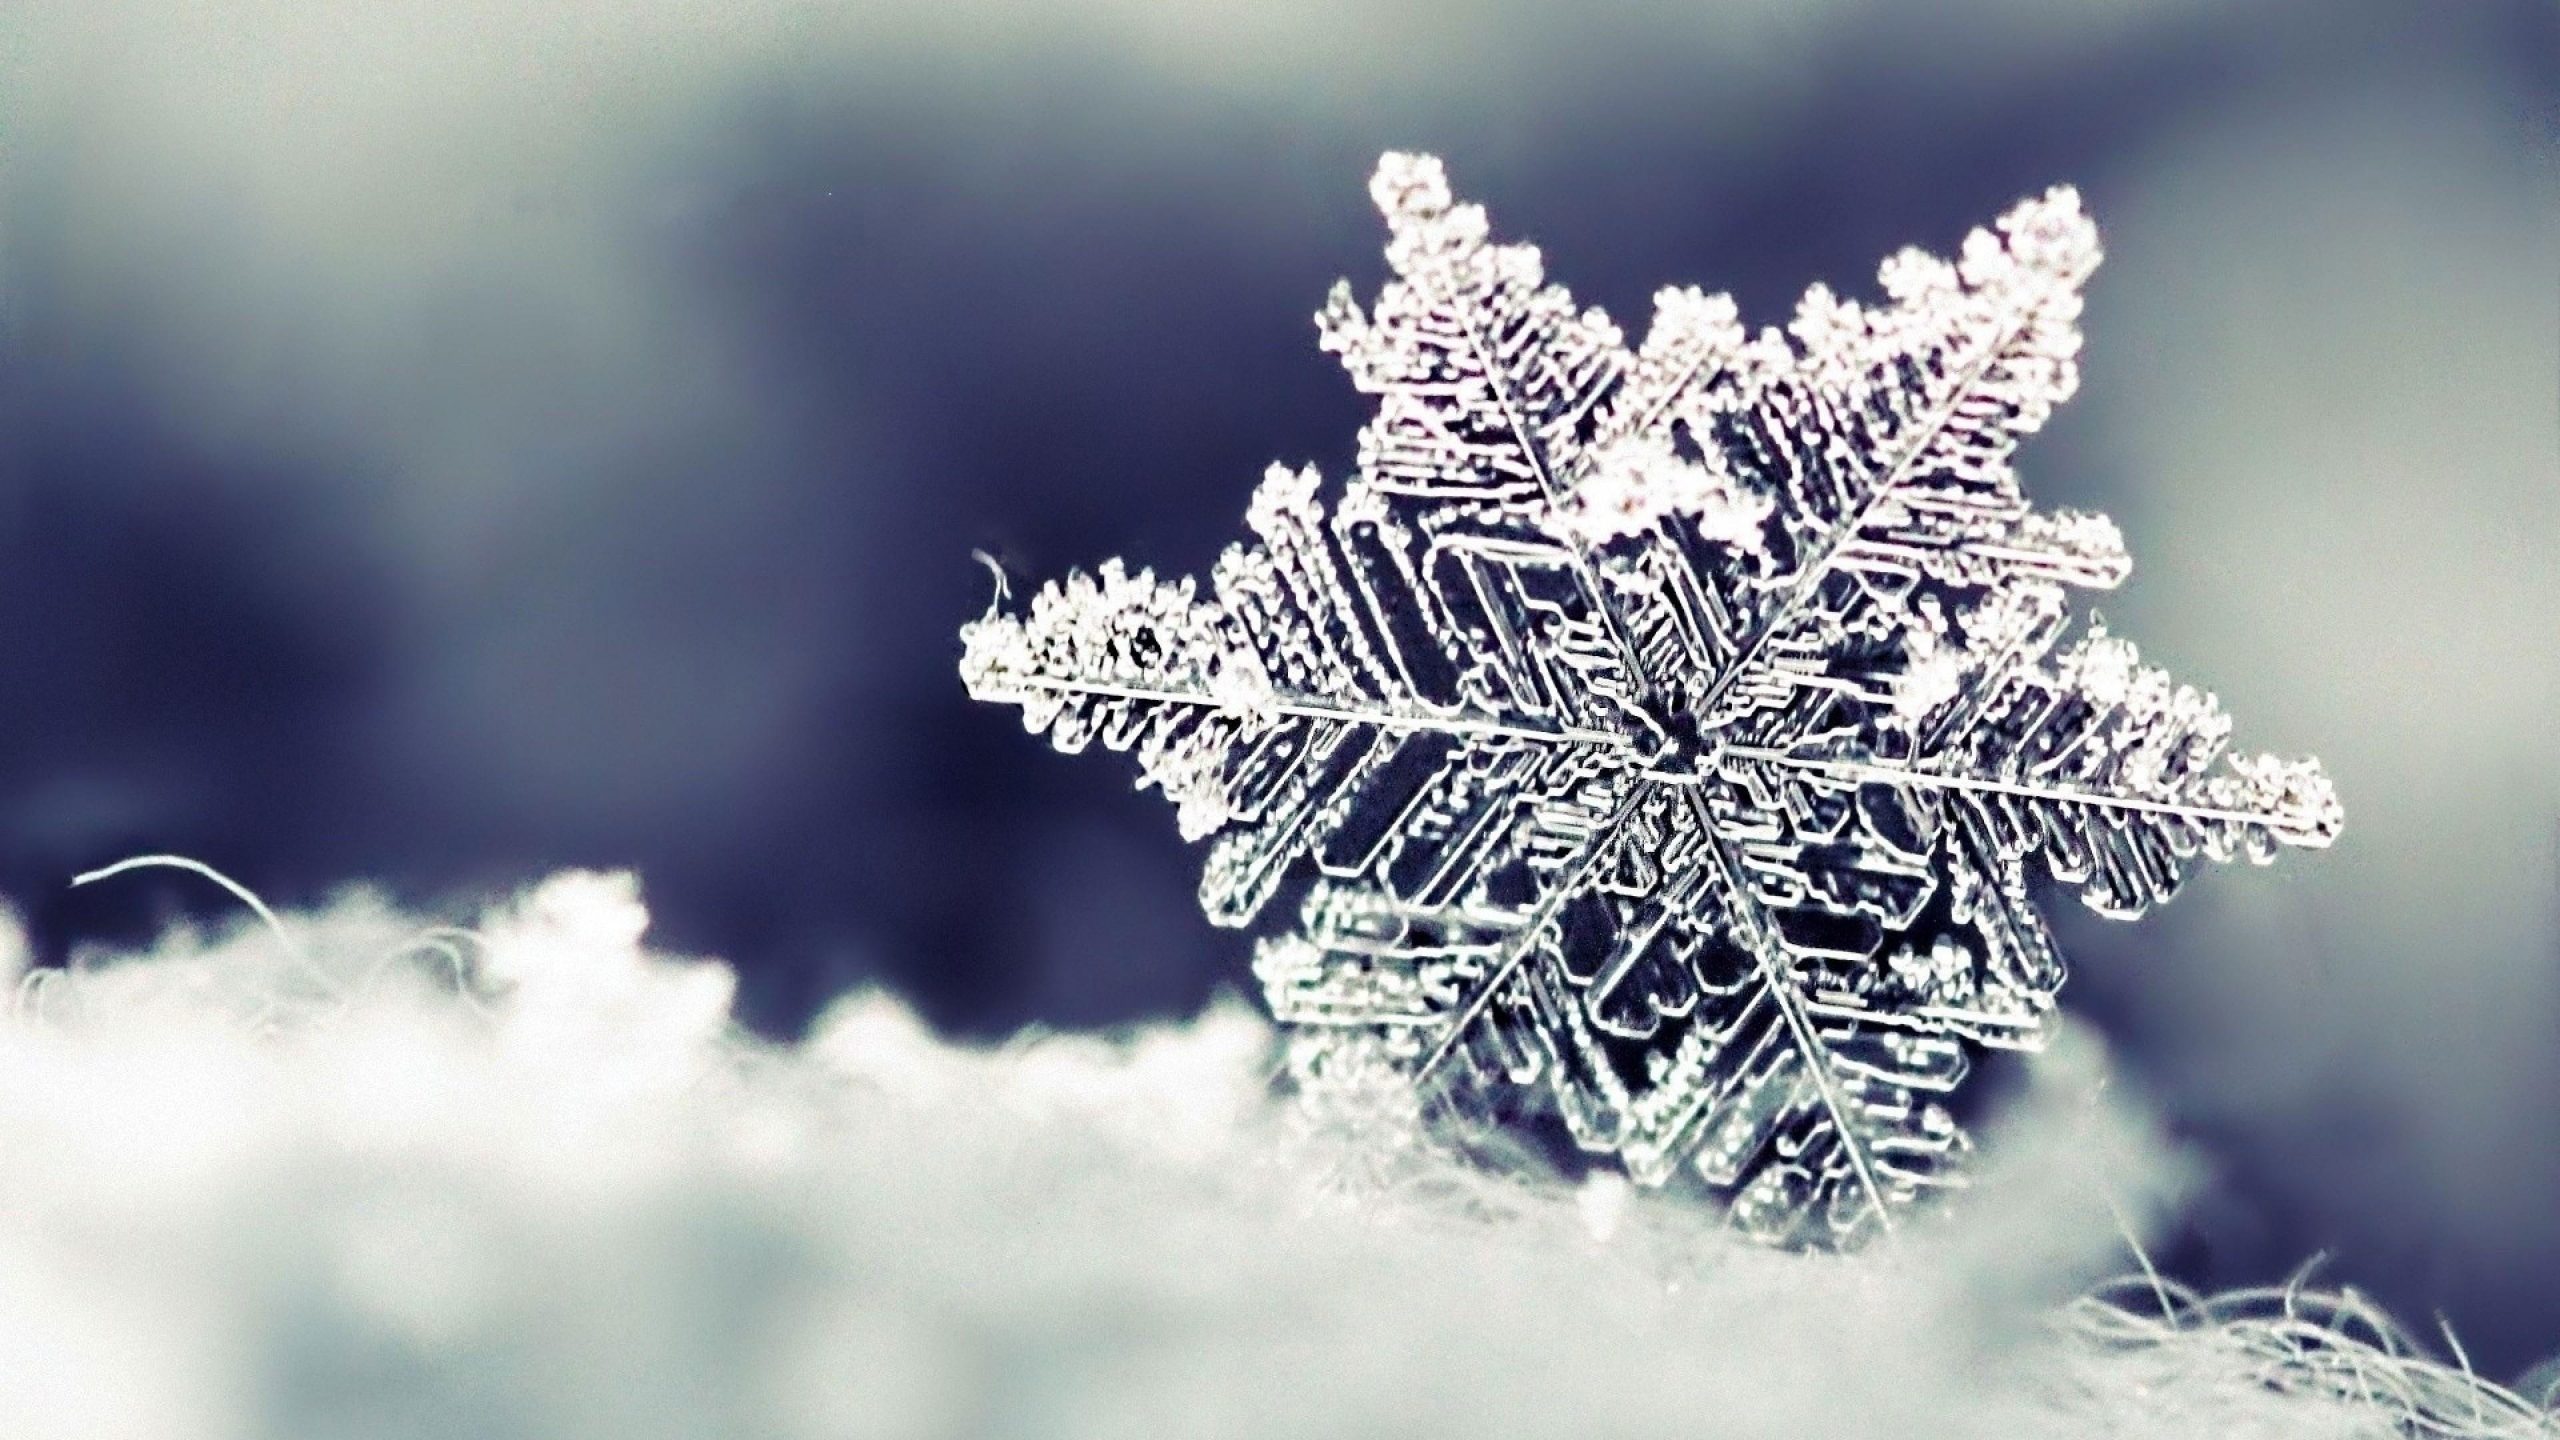 Snowflake wallpaper, winter, frost, freezing, macro photography, close up